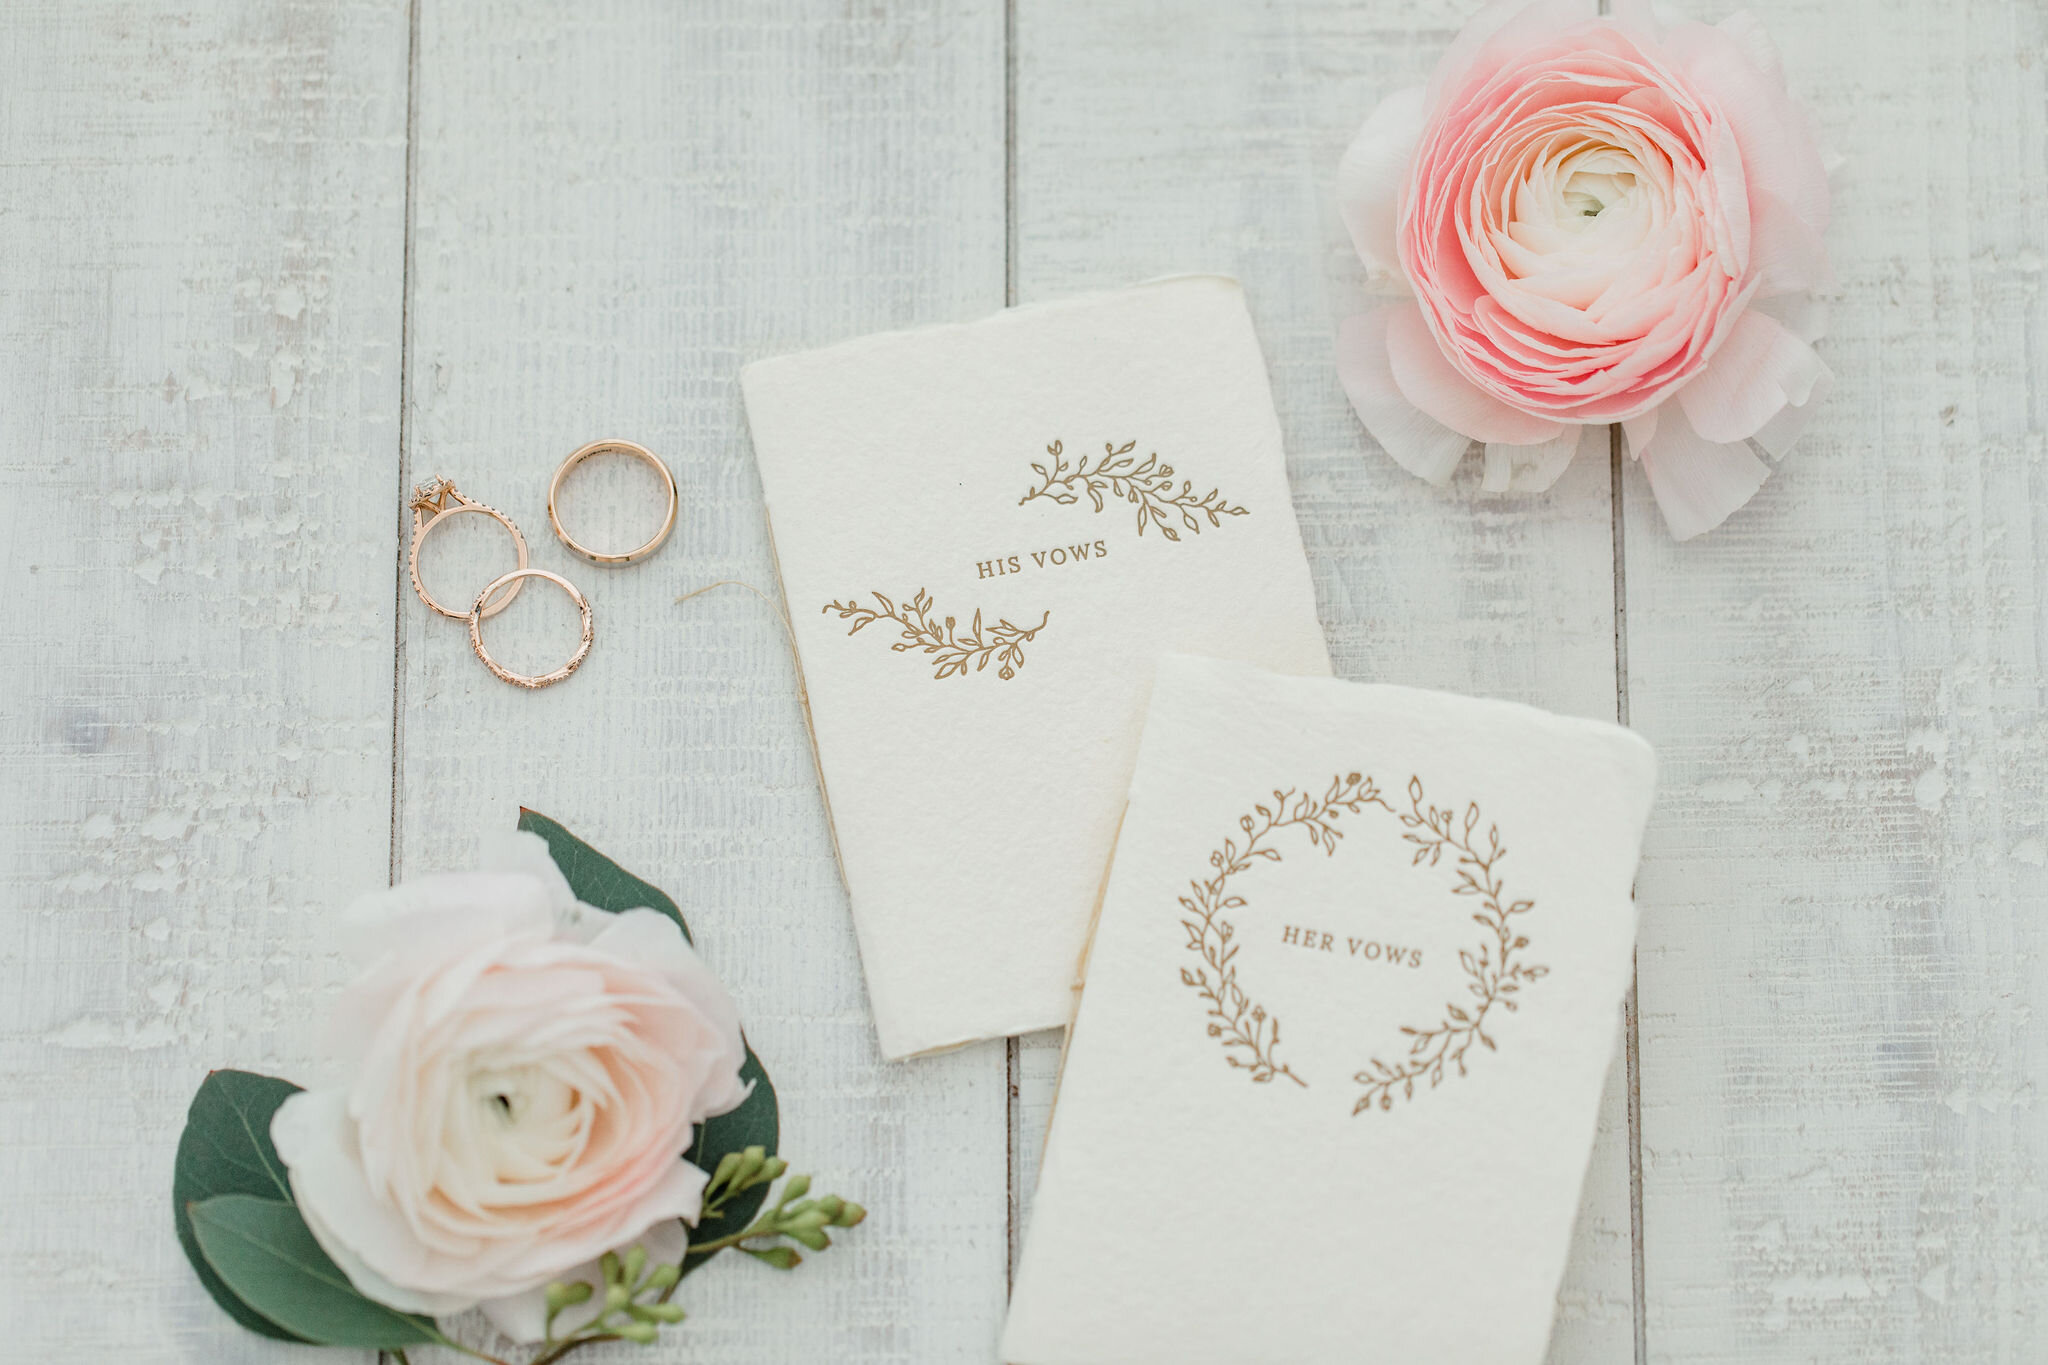 Romantic Micro Wedding wedding rings and vow books